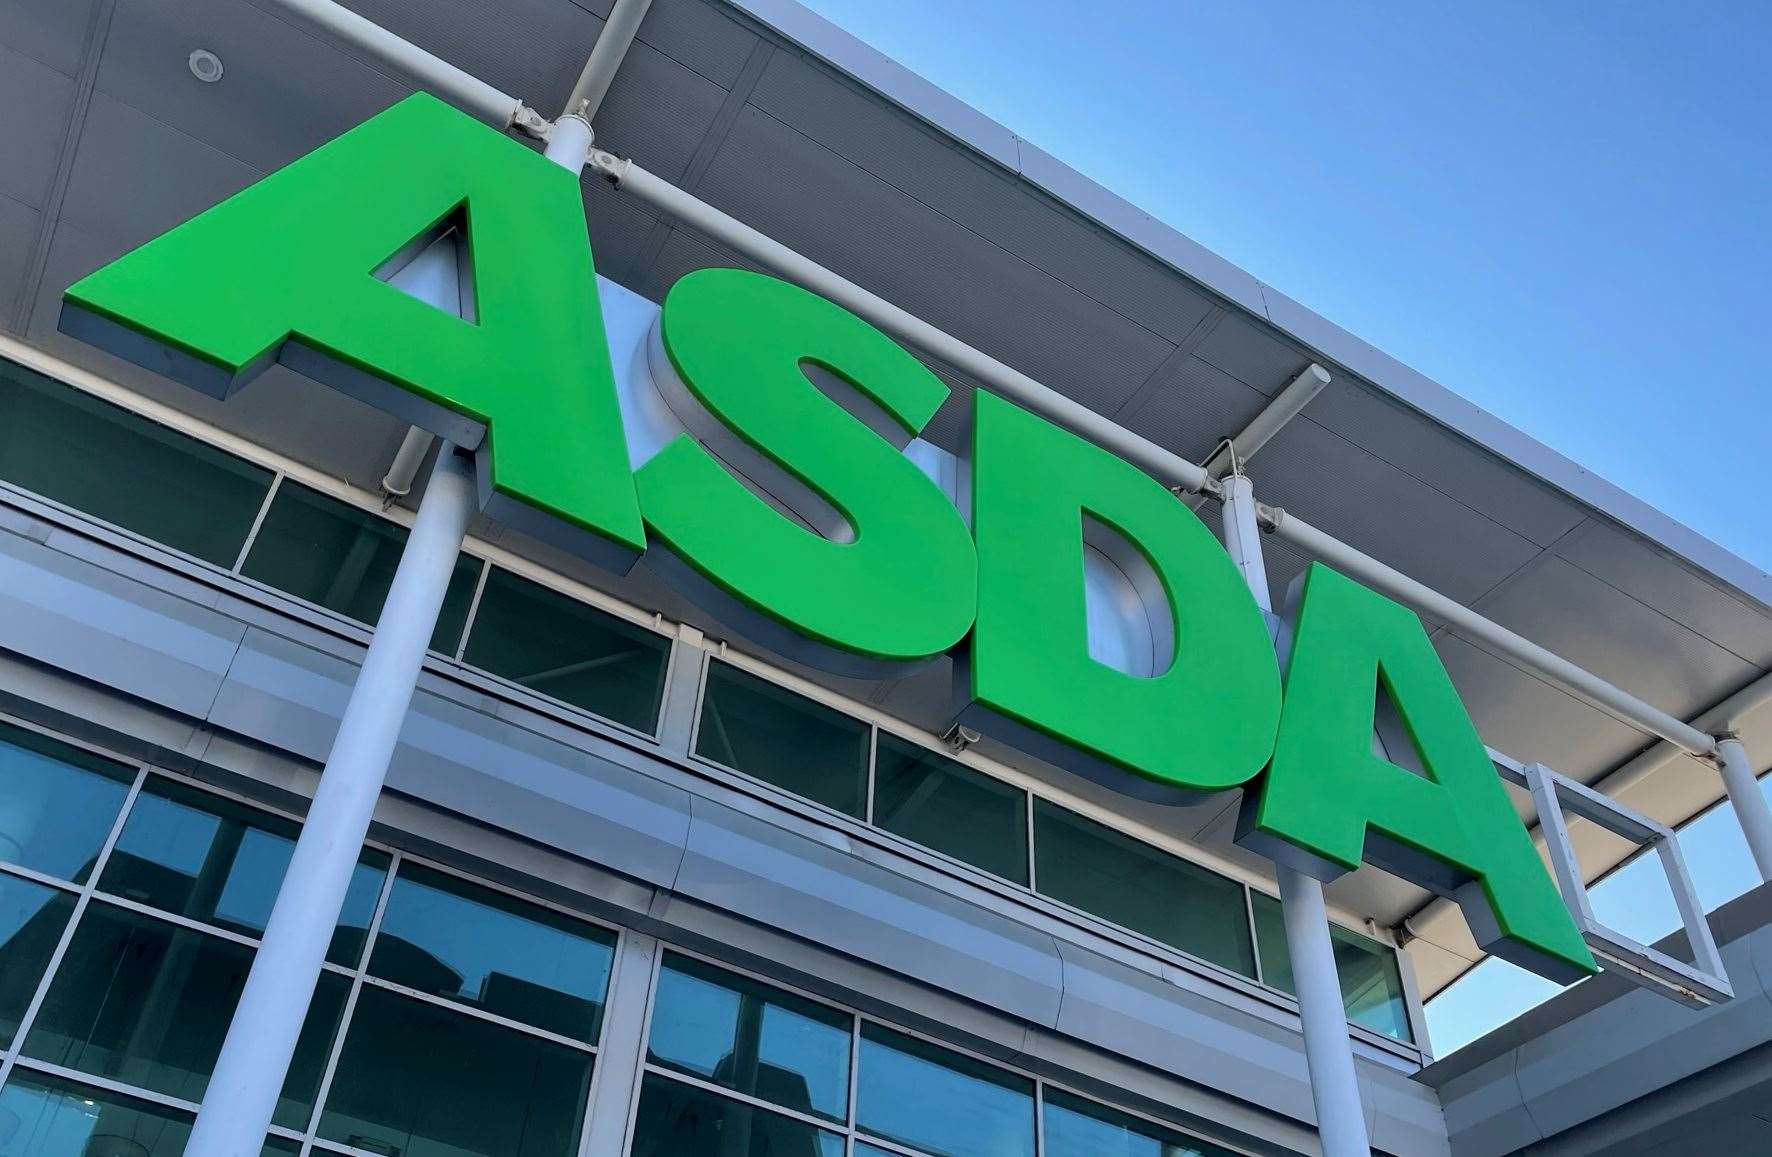 Asda sun creams came out among the strongest performers. Image: iStock.